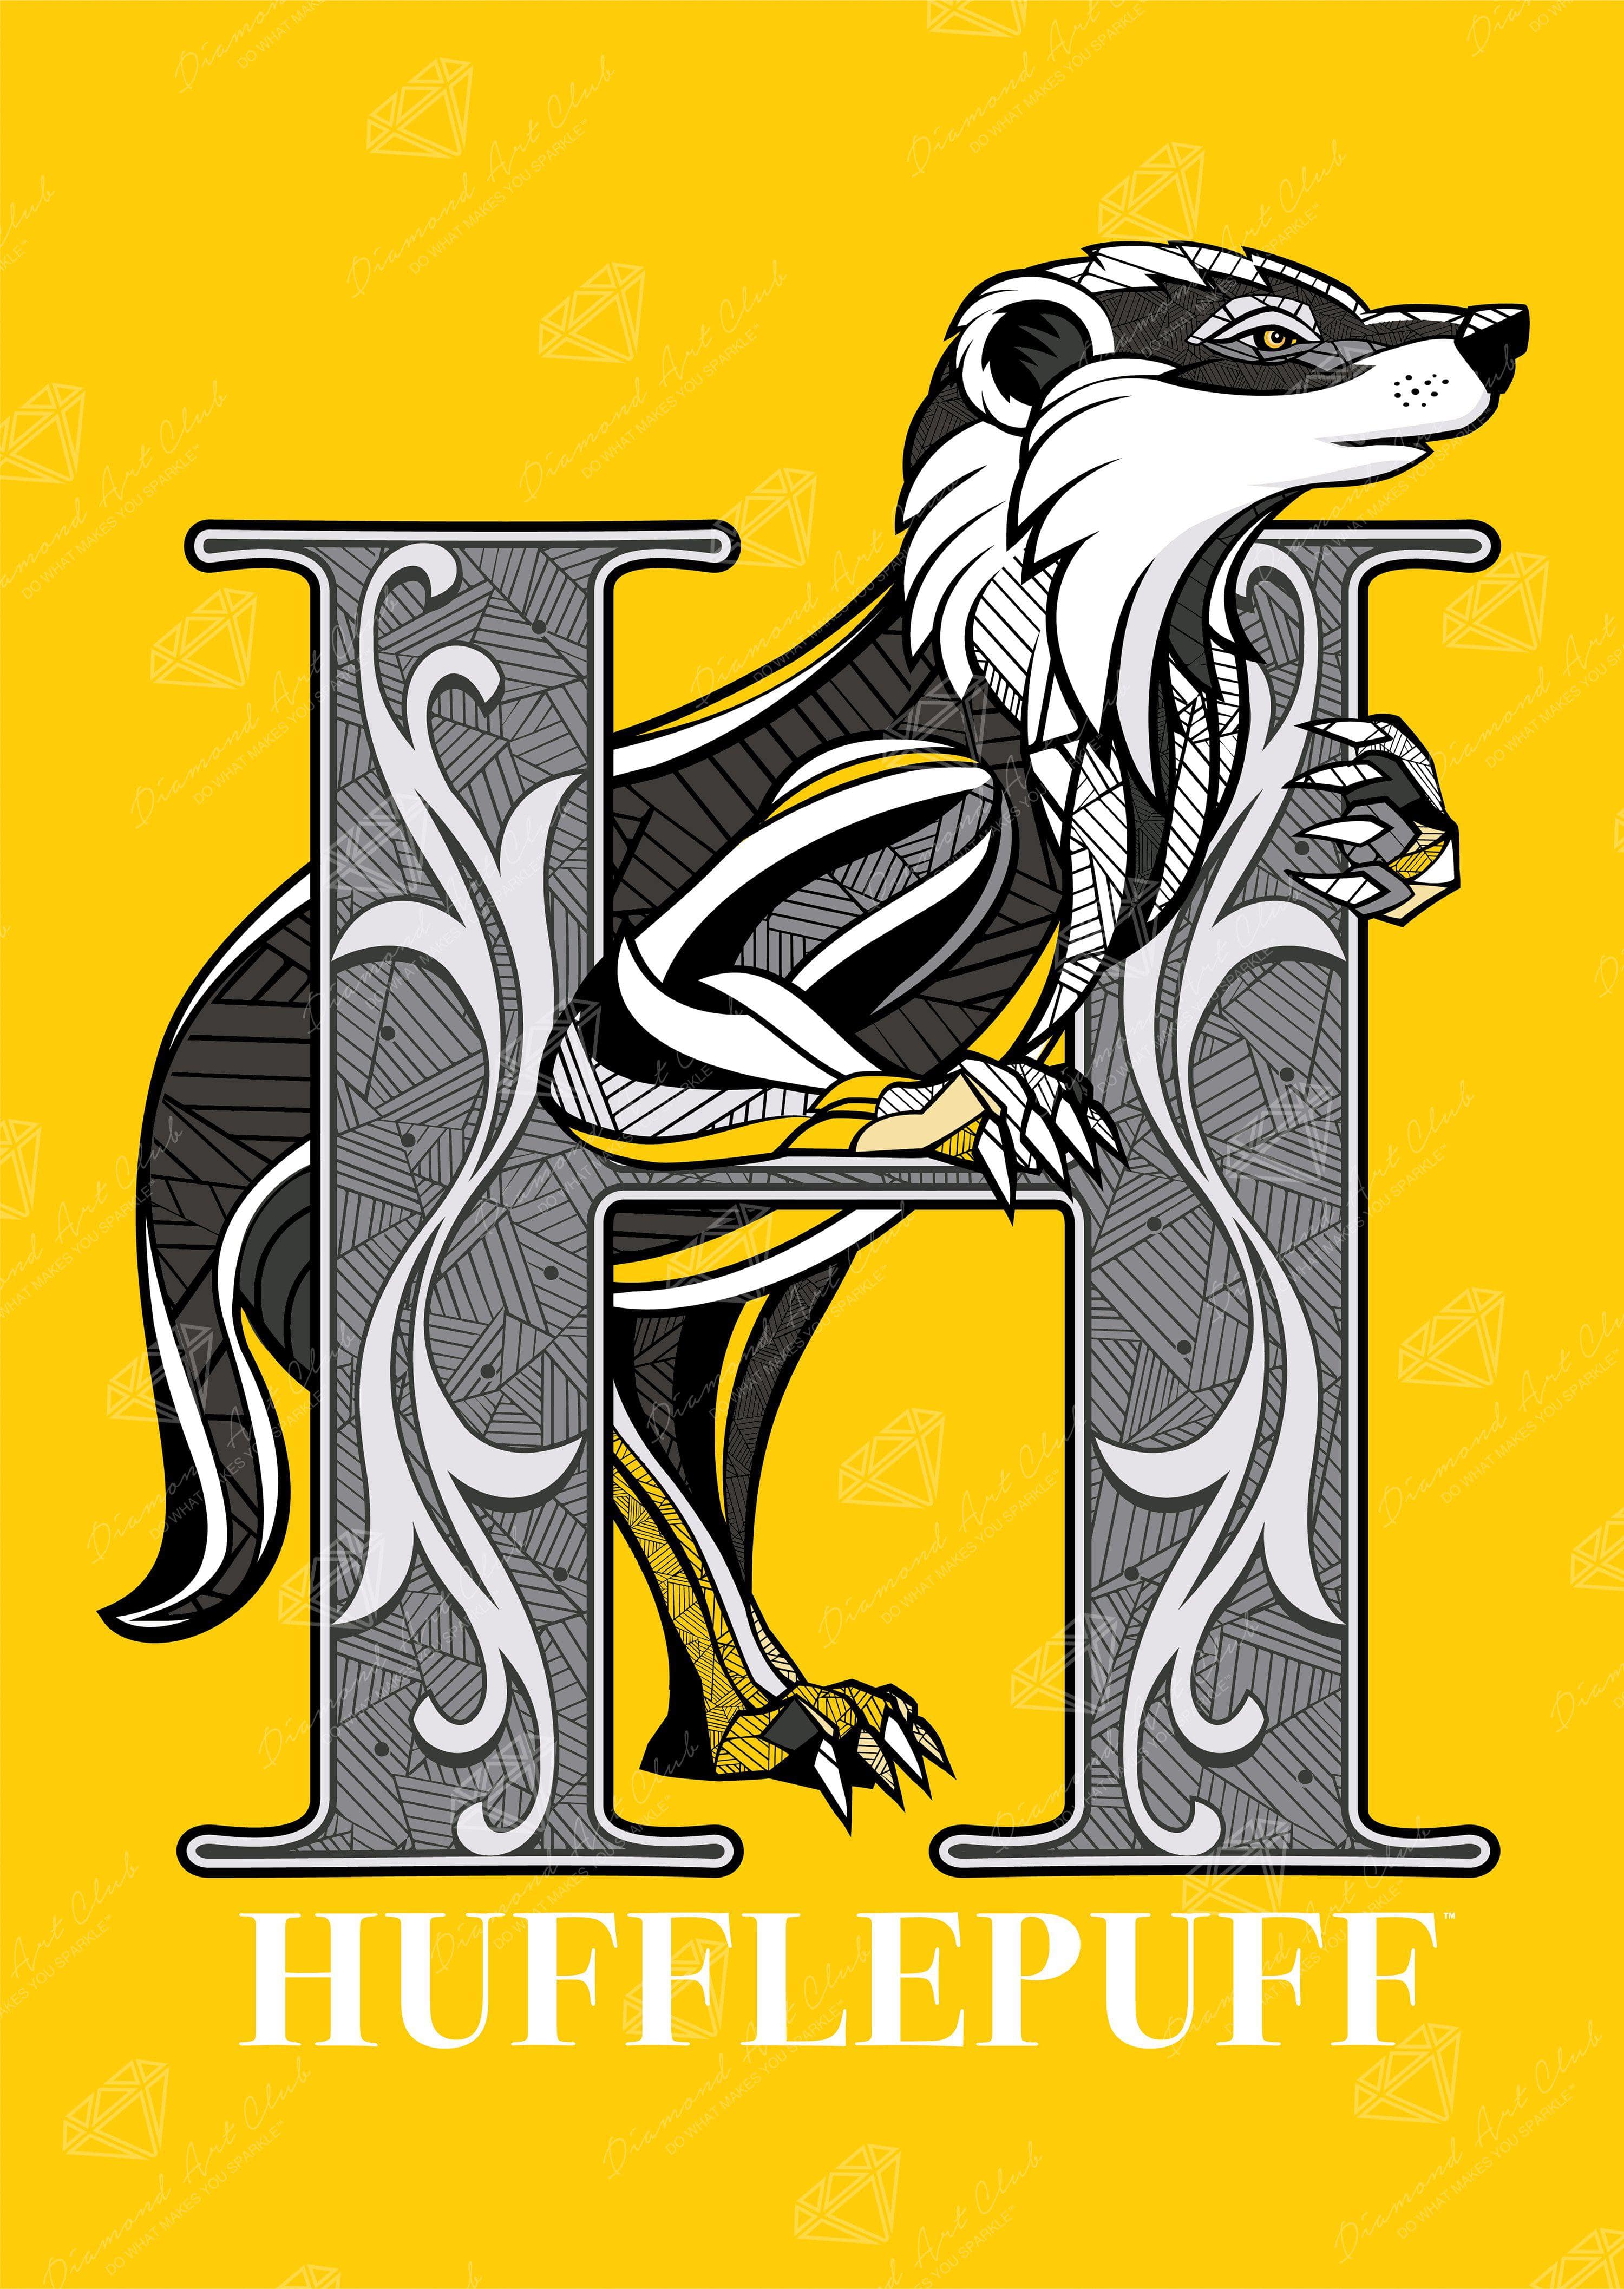 Just finished this Hufflepuff diamond painting : r/harrypotter